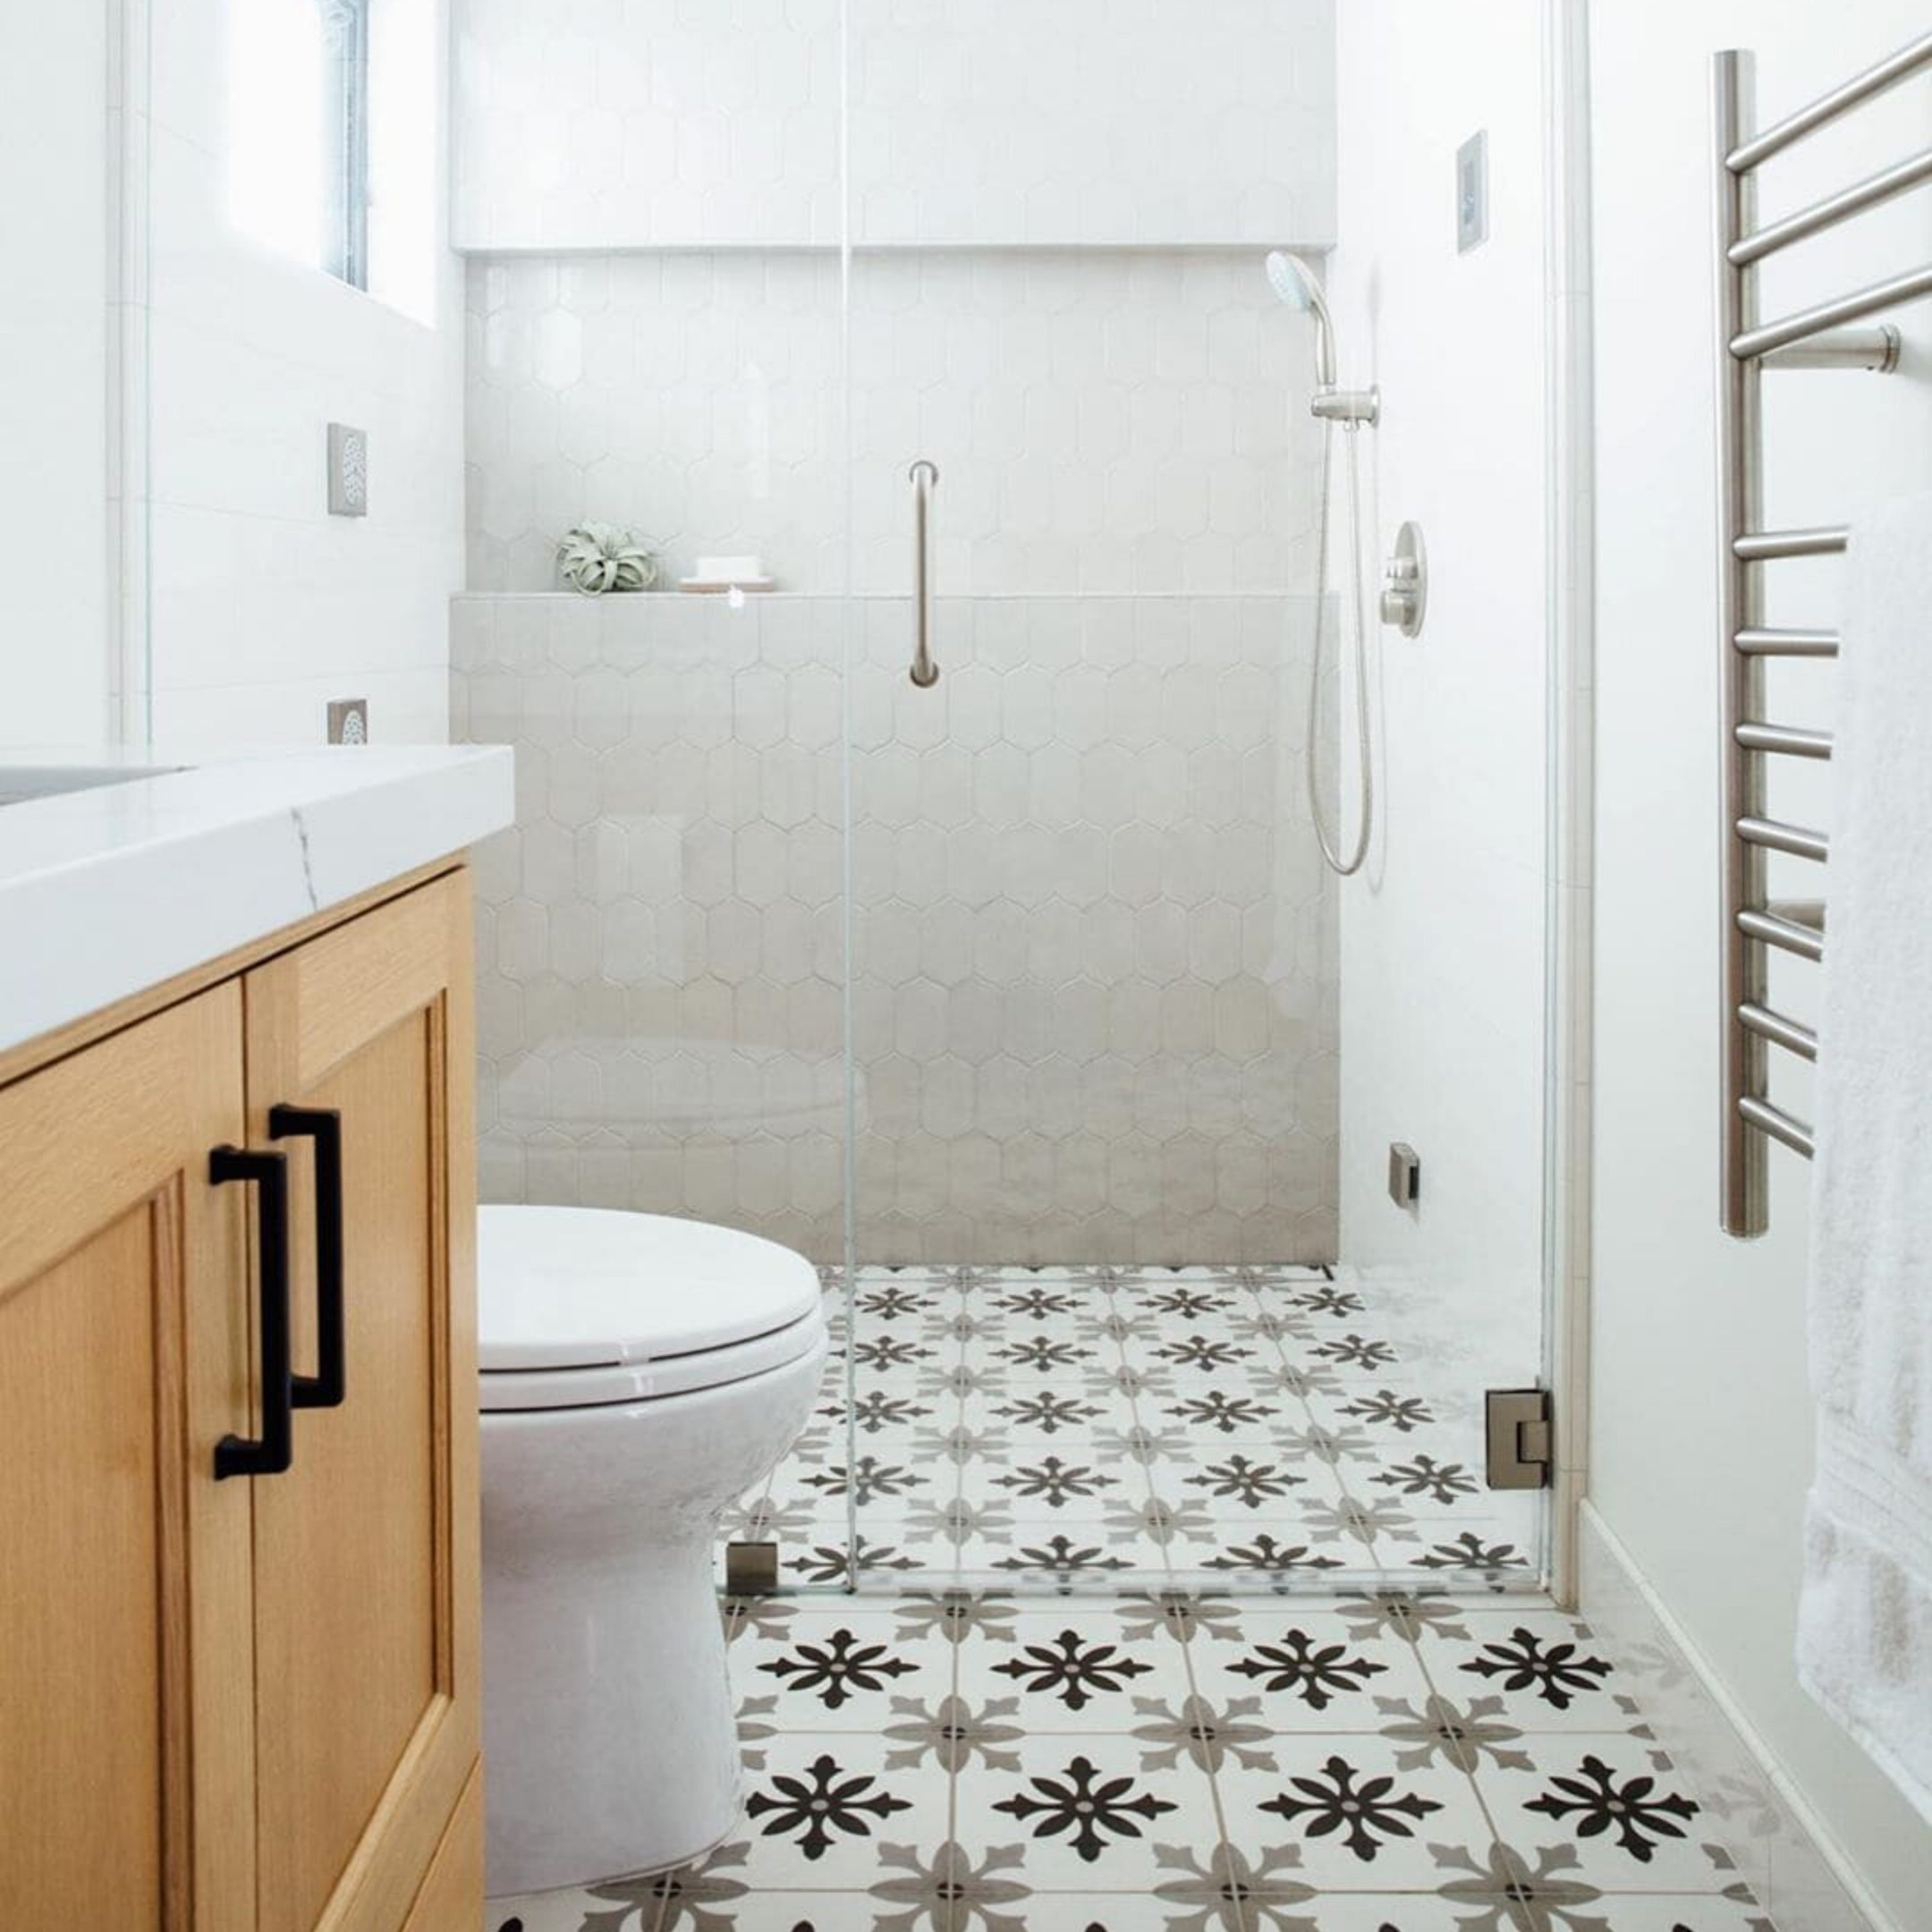 10 walk-in shower tile ideas that will inspire you